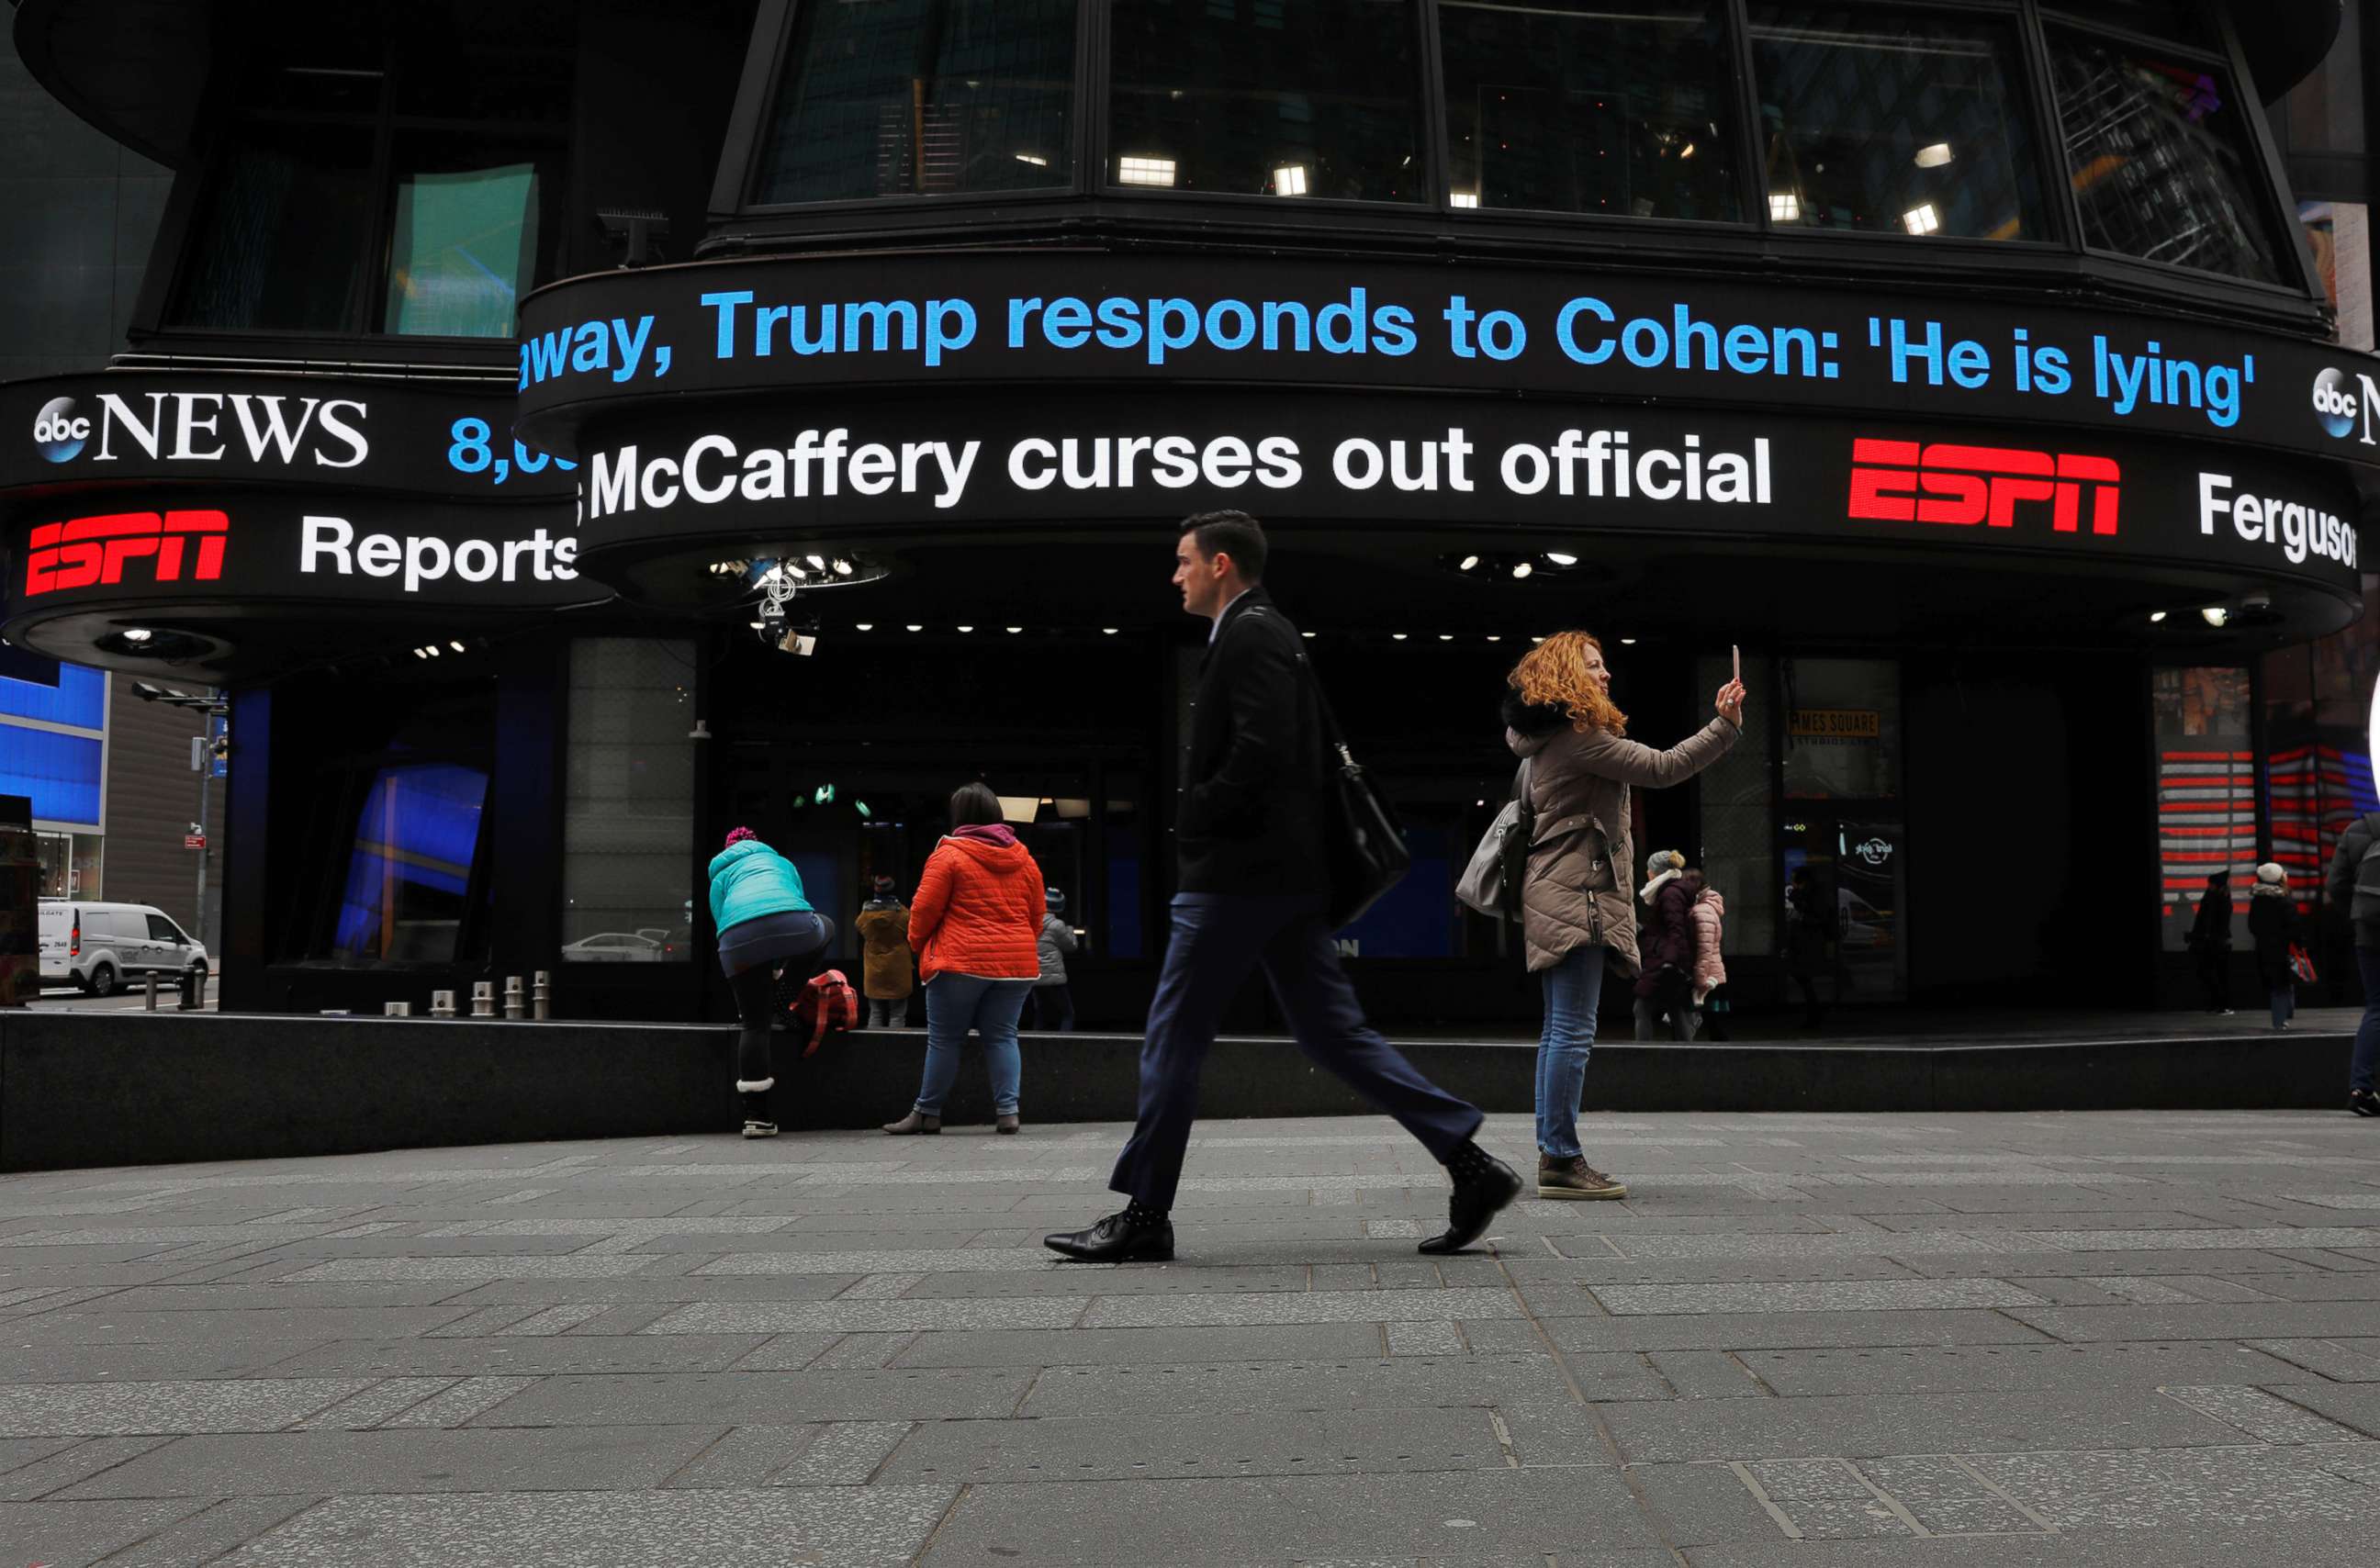 PHOTO: Pedestrians walk past a news banner in the Times Square, New York as it references Michael Cohen, the former personal attorney of President Donald Trump, as he testifies before Congress, Feb. 27, 2019.